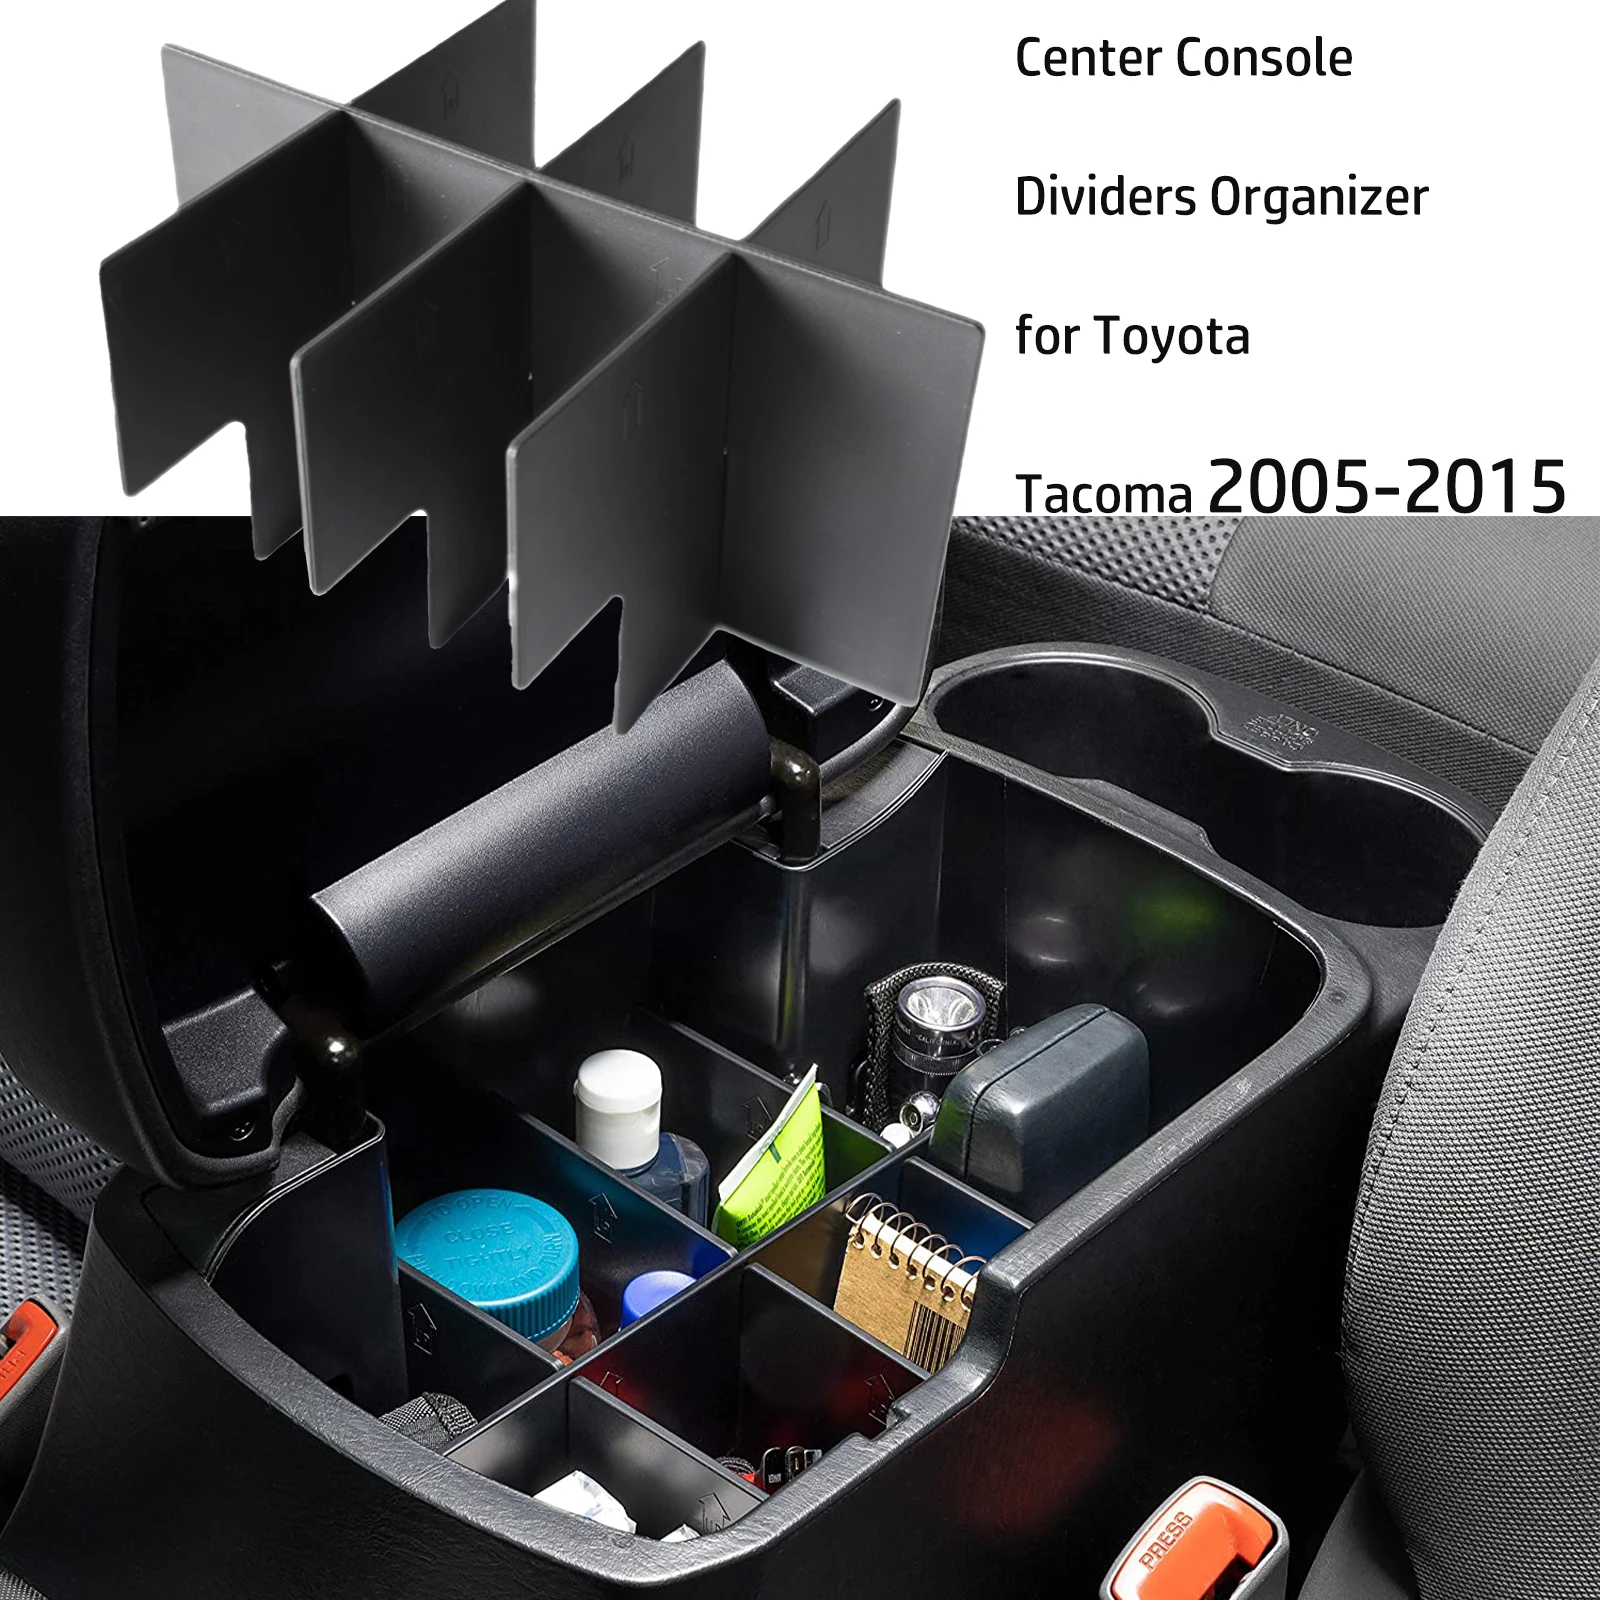 

Center Console Dividers Organizer for Toyota Tacoma 2005-2015 2nd Gen Accessories,Insert Box ABS Secondary Storage